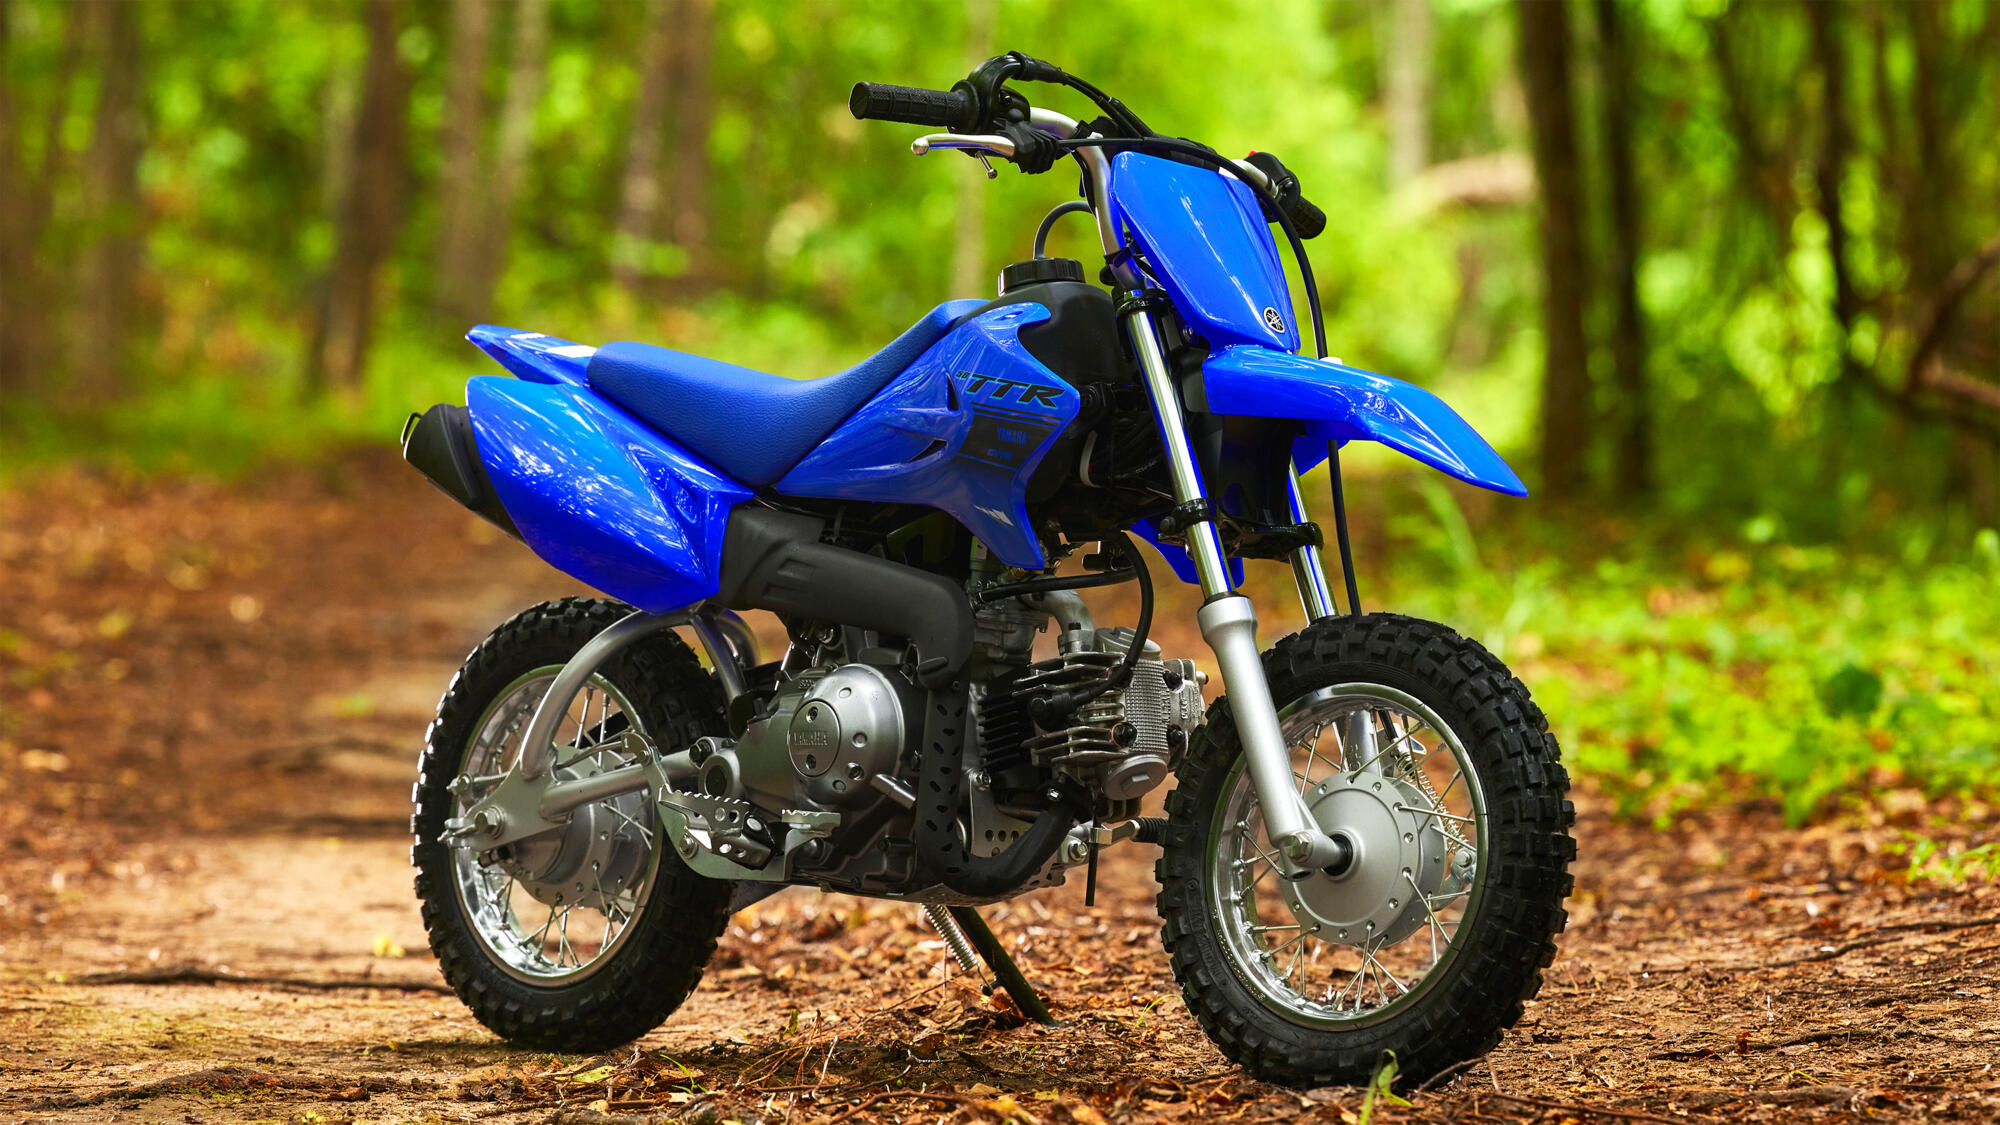 Yamaha TTR50 Features and Technical Specifications